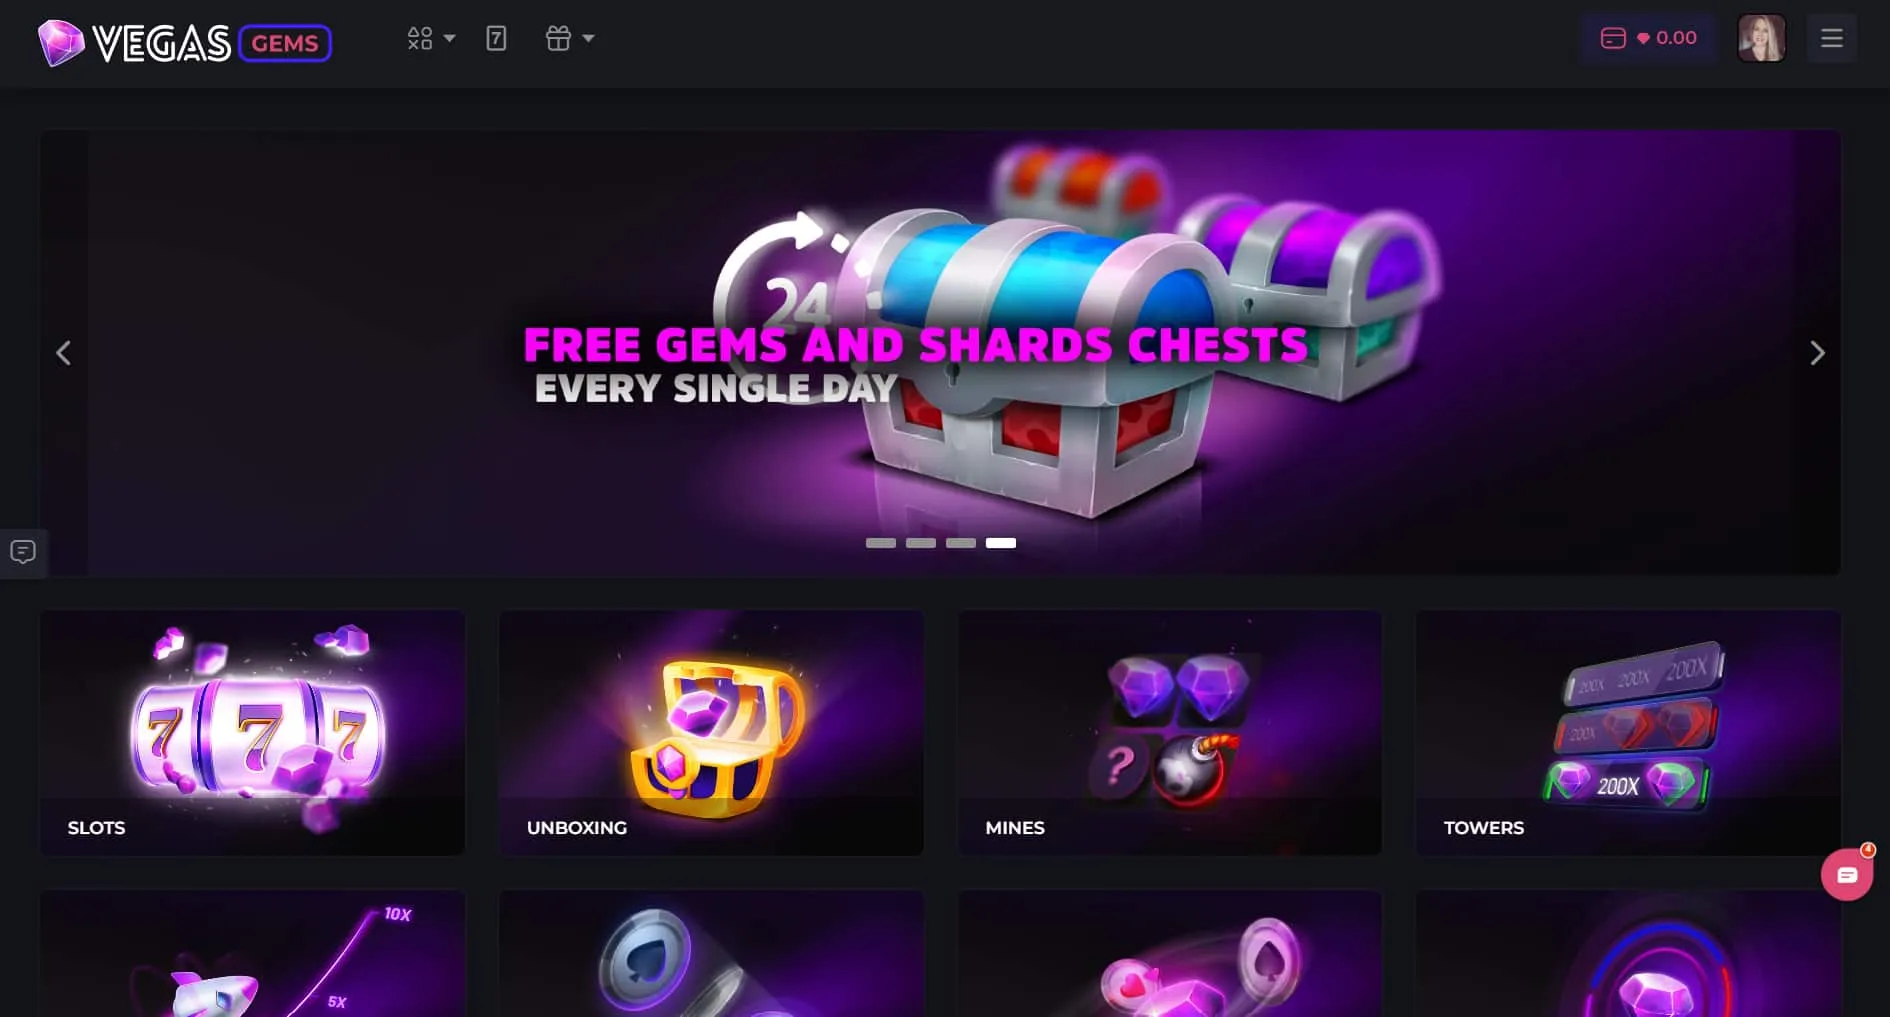 Vegas Gems Free Gems and Shards Chests